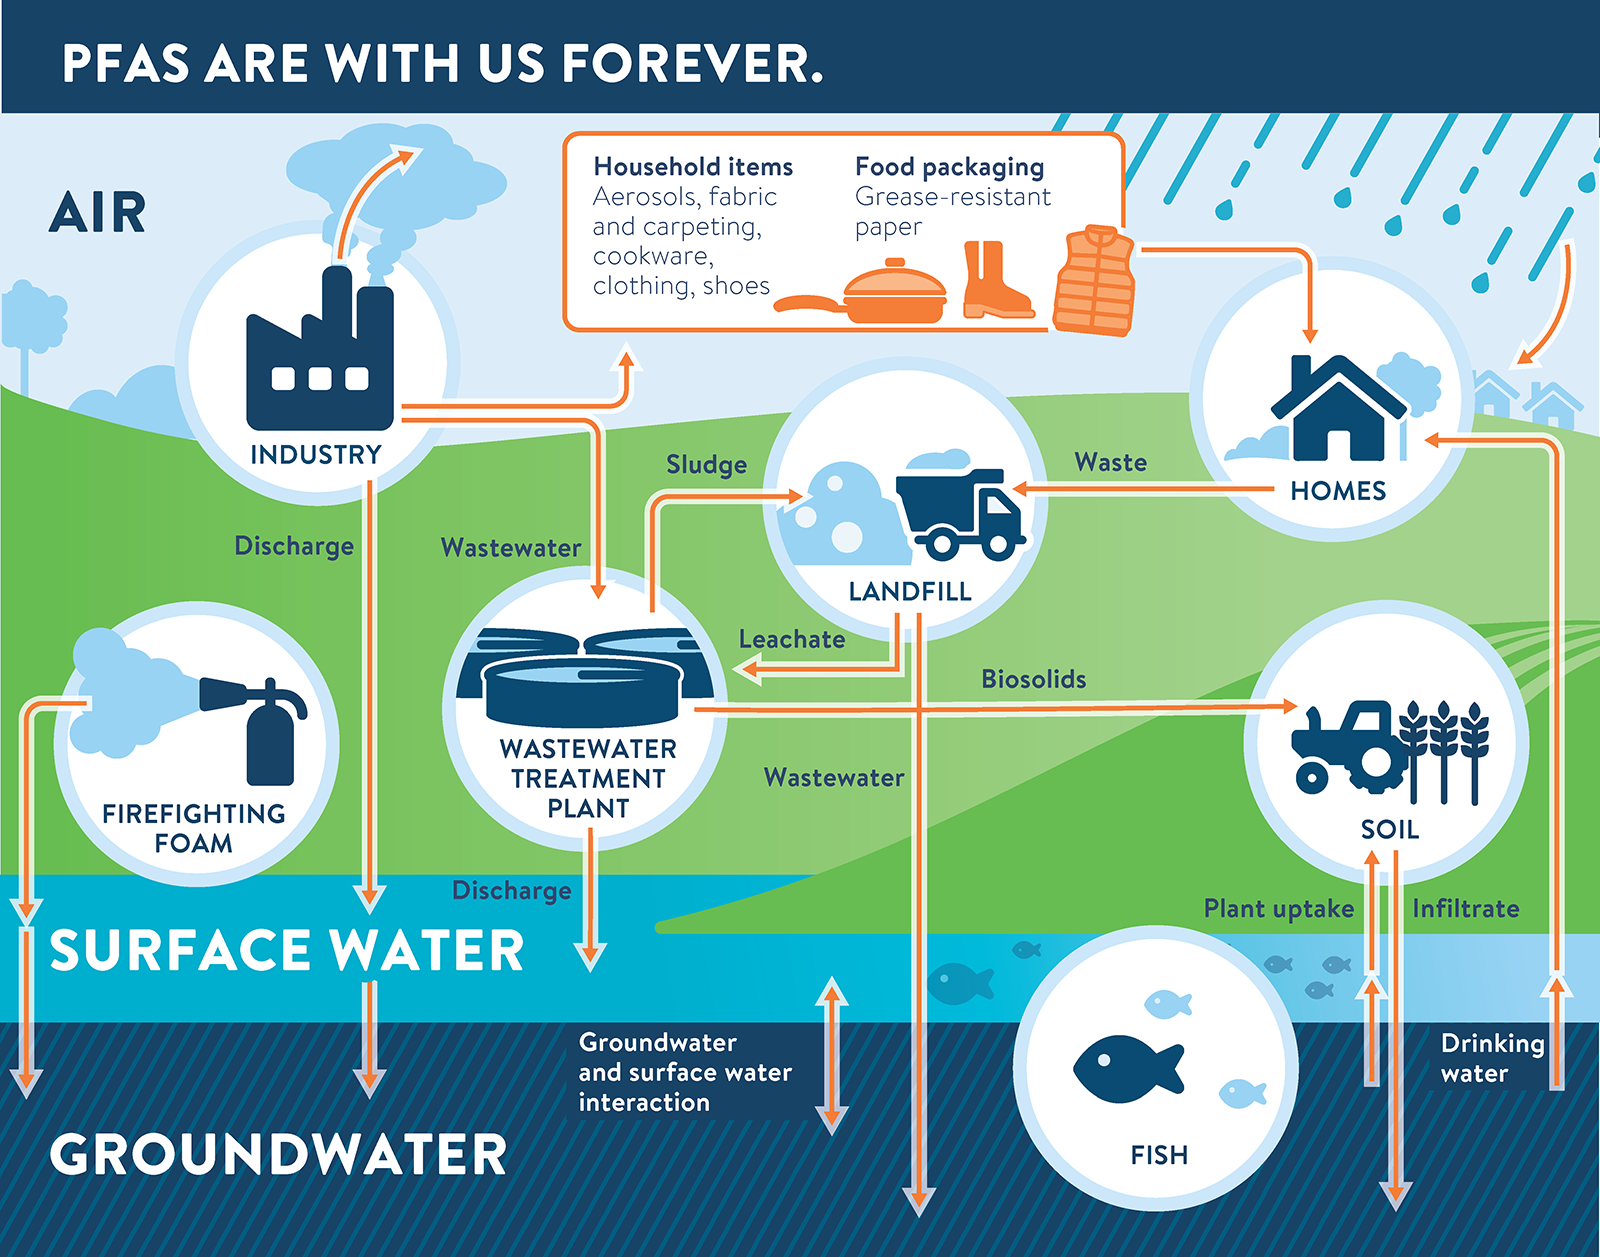 PFAS are forever chemicals. Old landfills, industrial sites, firefighting foam and wastewater treatment discharge are just some of the ways PFAS can contaminate the environment. (Graphic courtesy of Minnesota Pollution Control Agency)